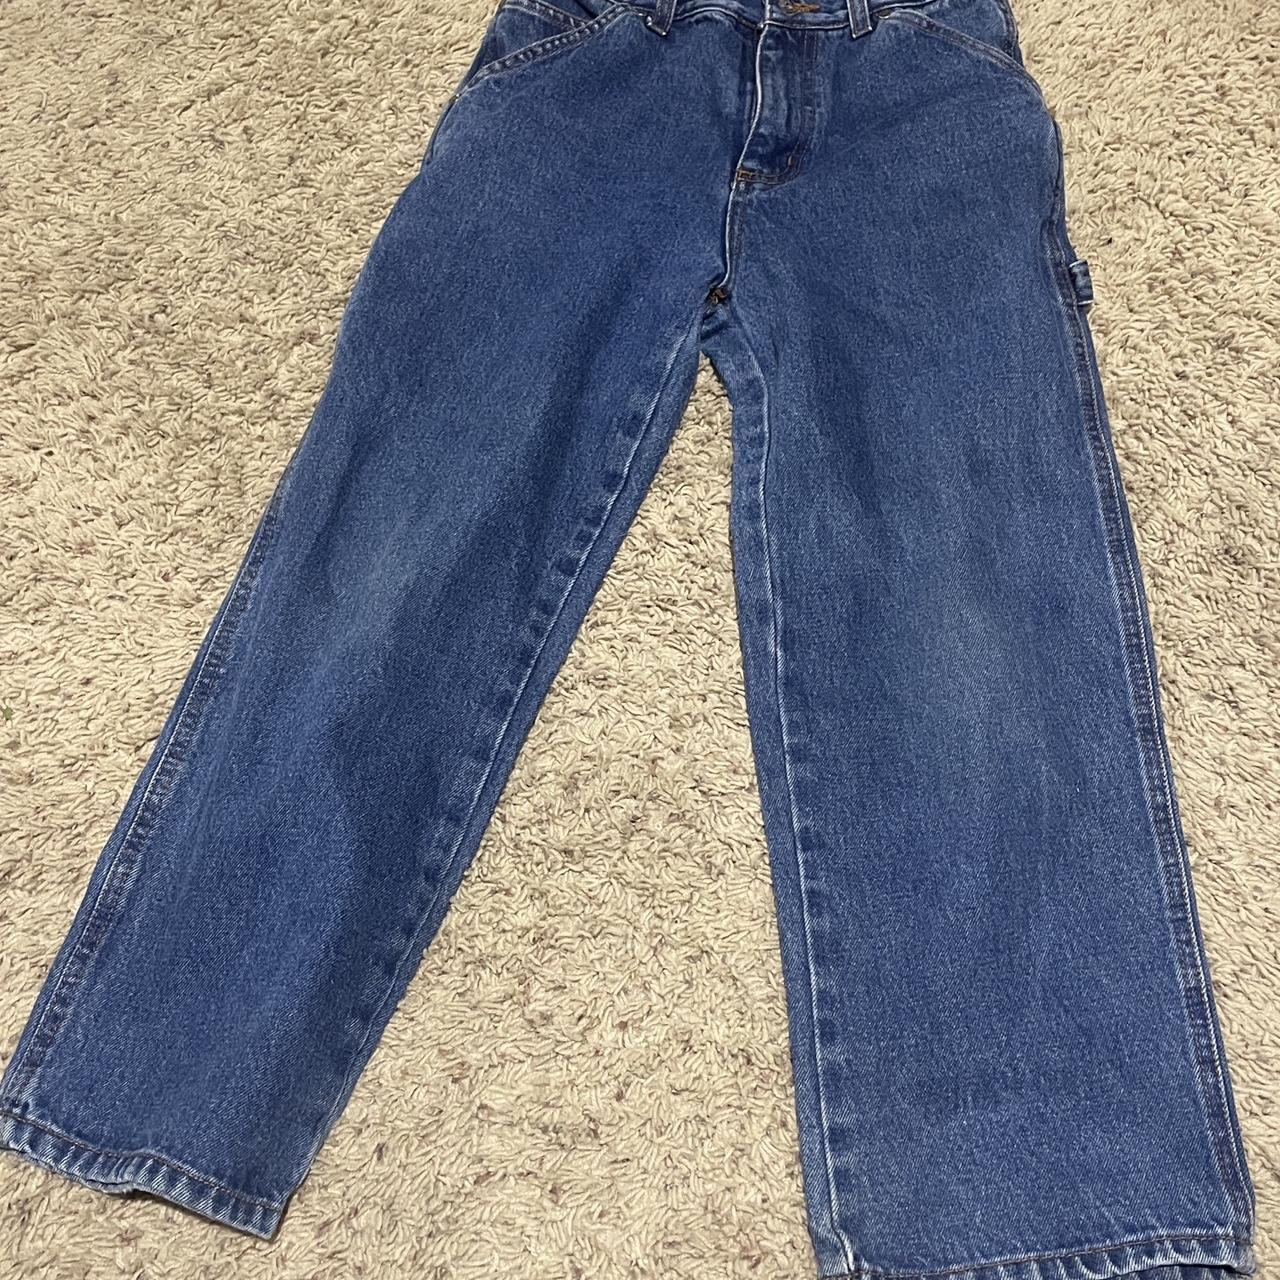 THE CUTEST VINTAGE JEANS EVER! These were my all... - Depop